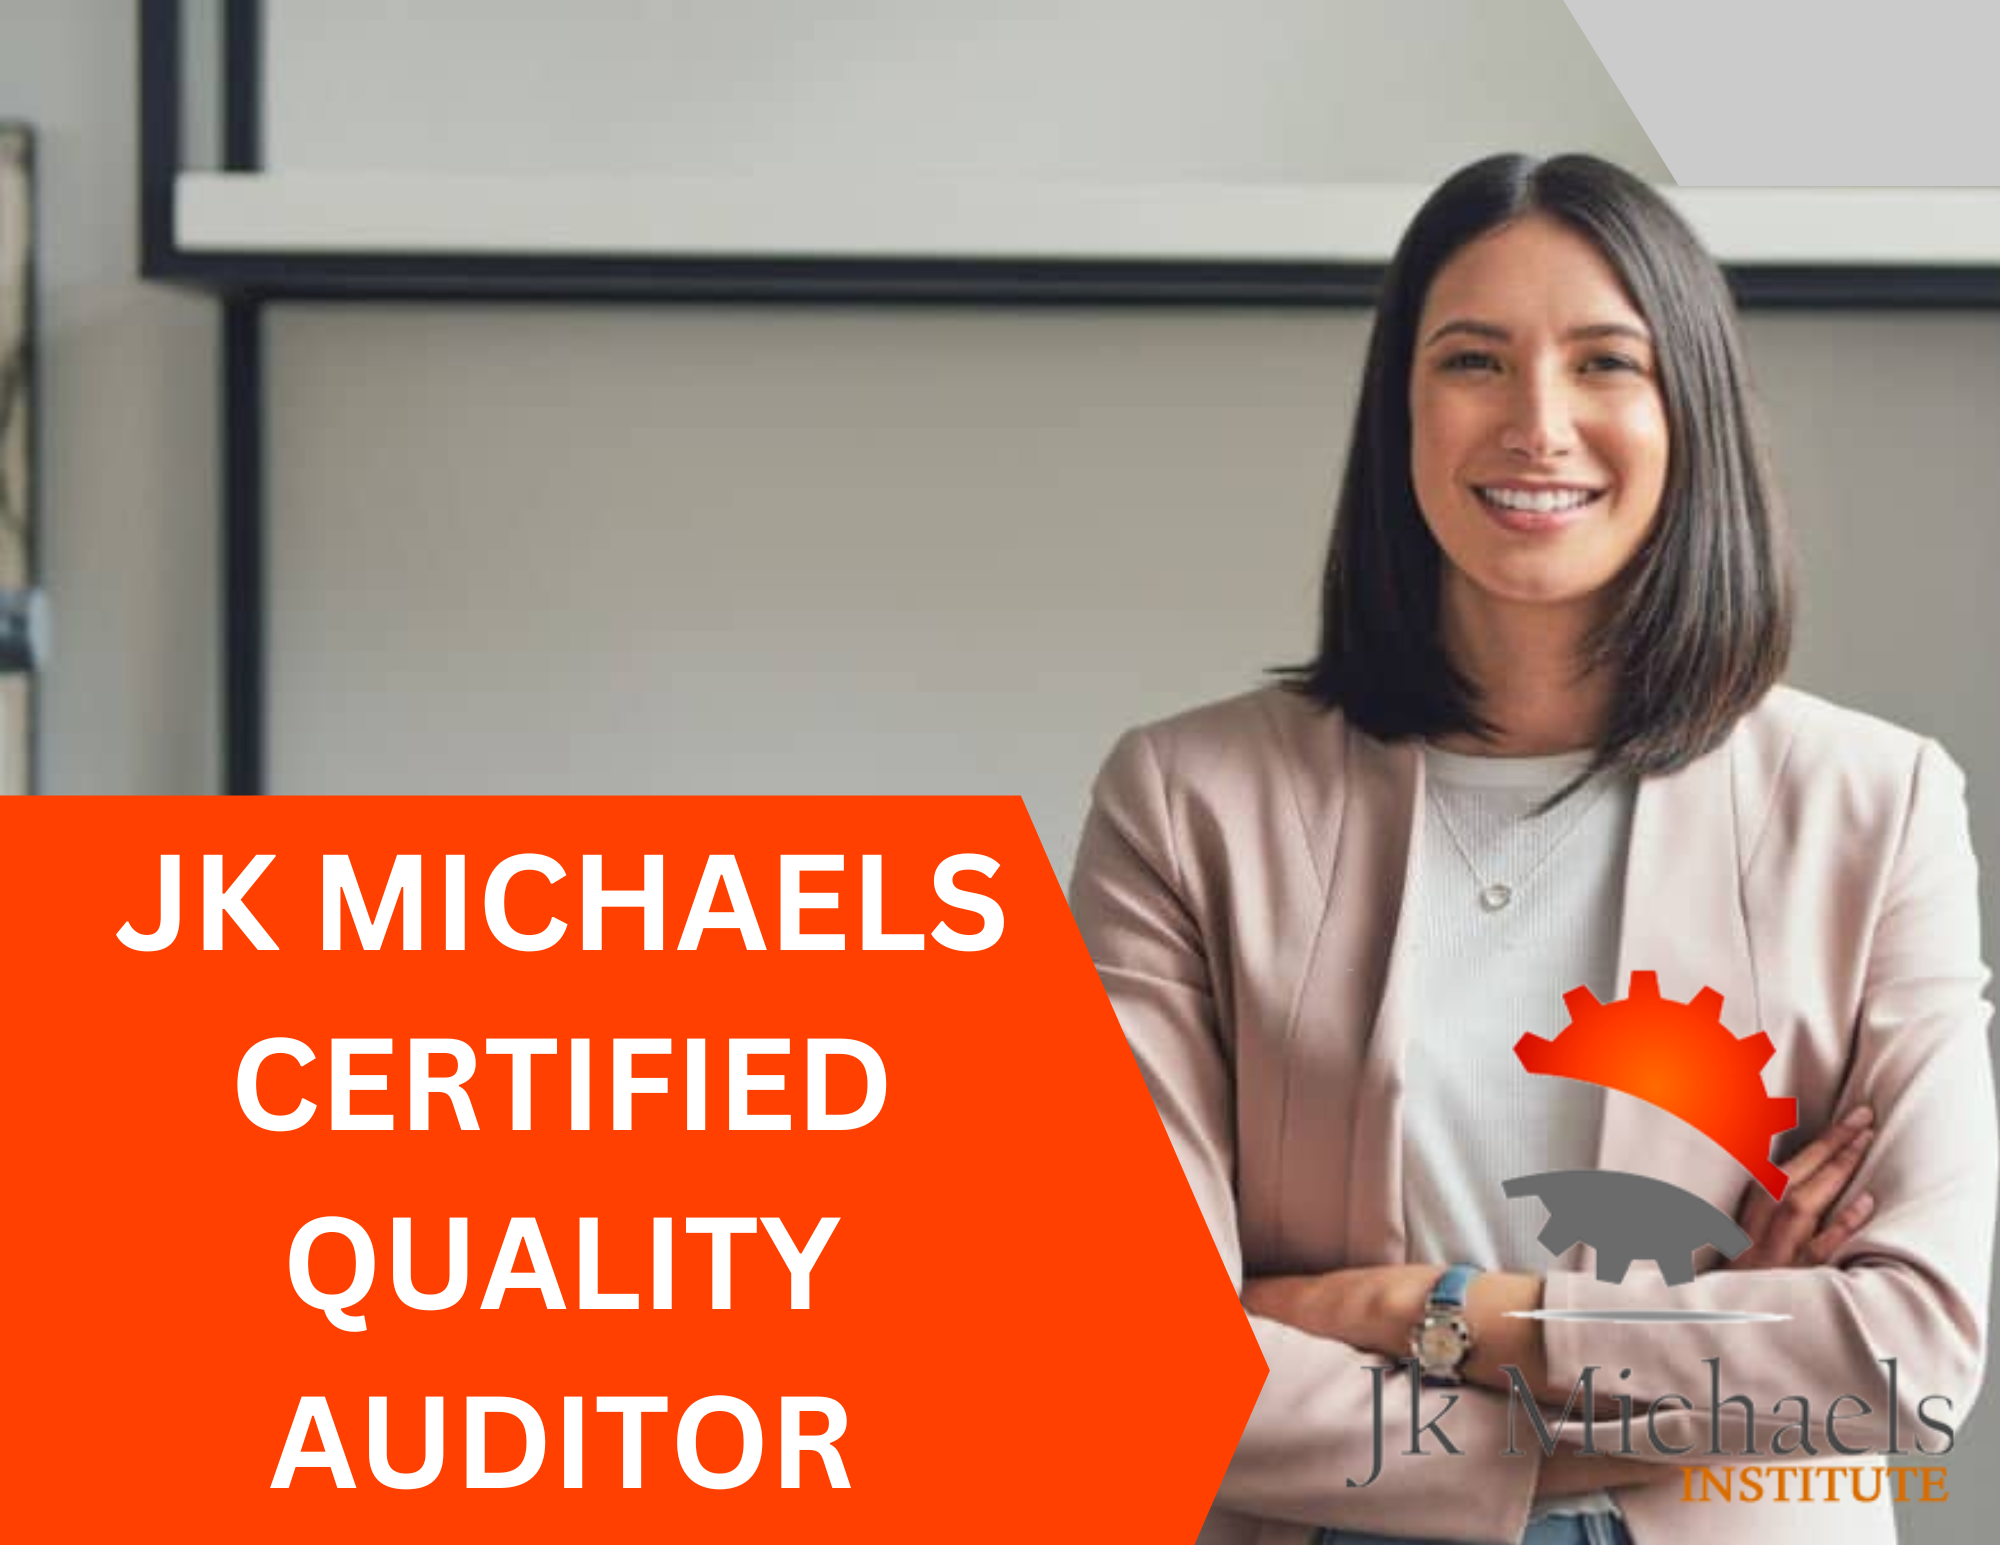 CERTIFIED QUALITY AUDITOR